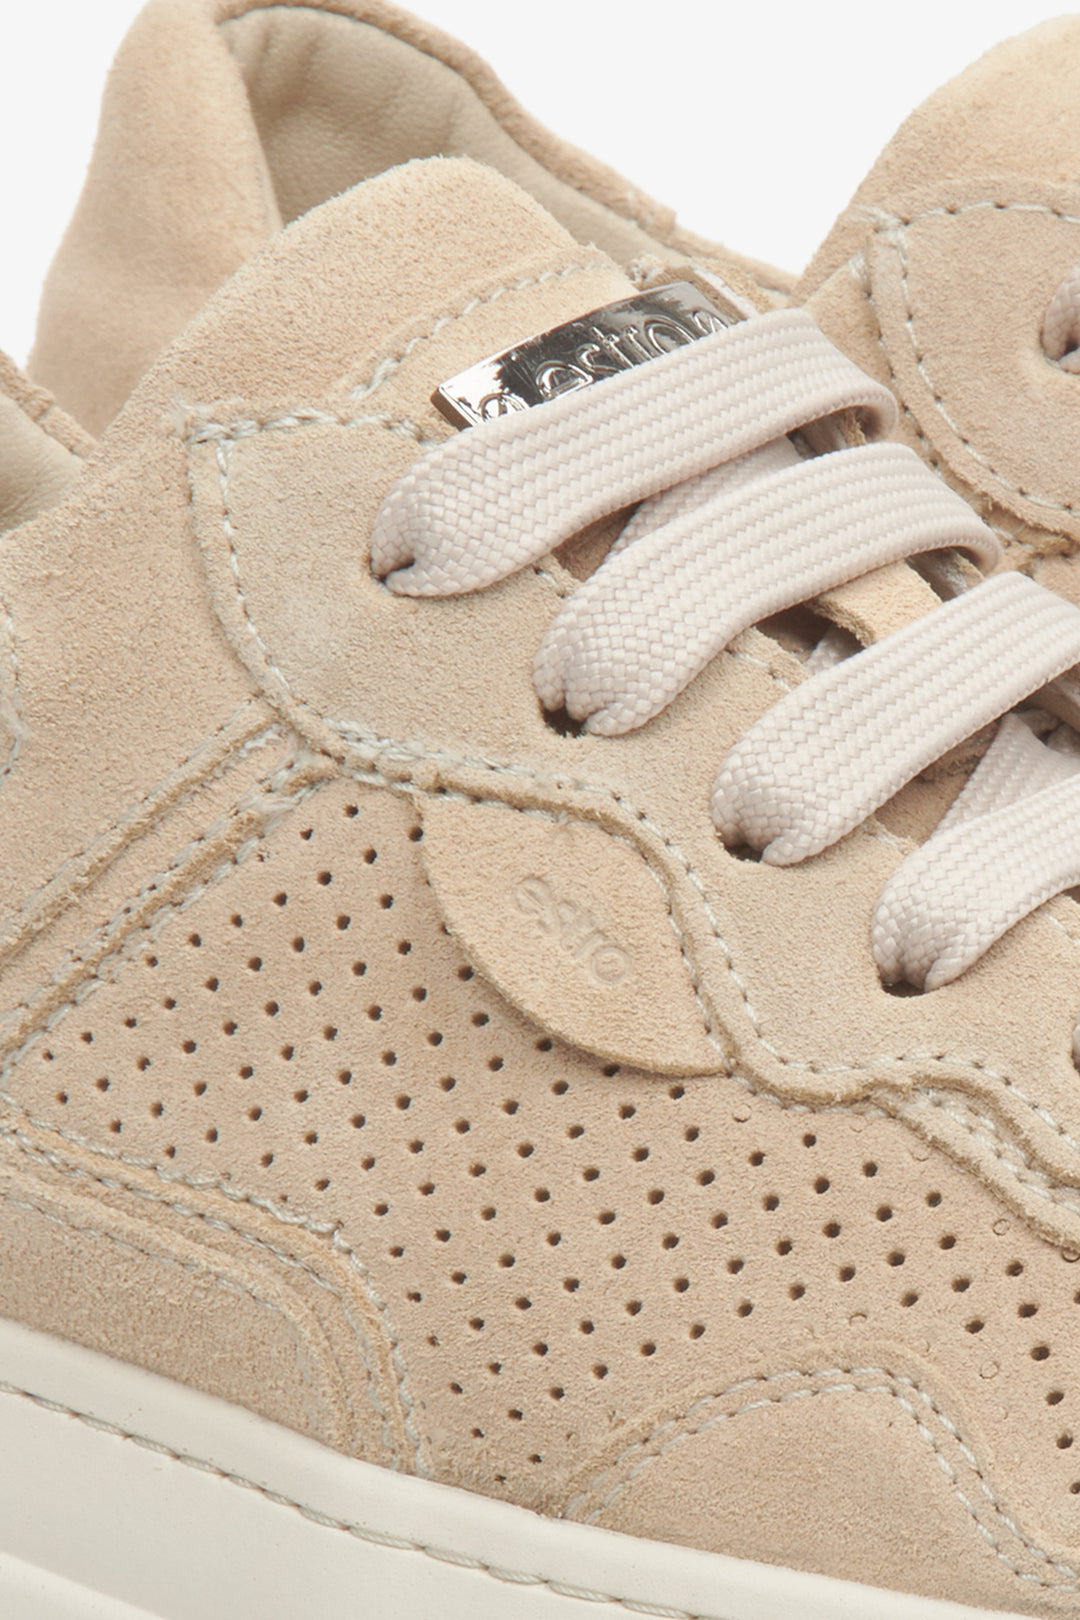 Estro women's suede sneakers in light beige with perforations for summer - close-up on details.